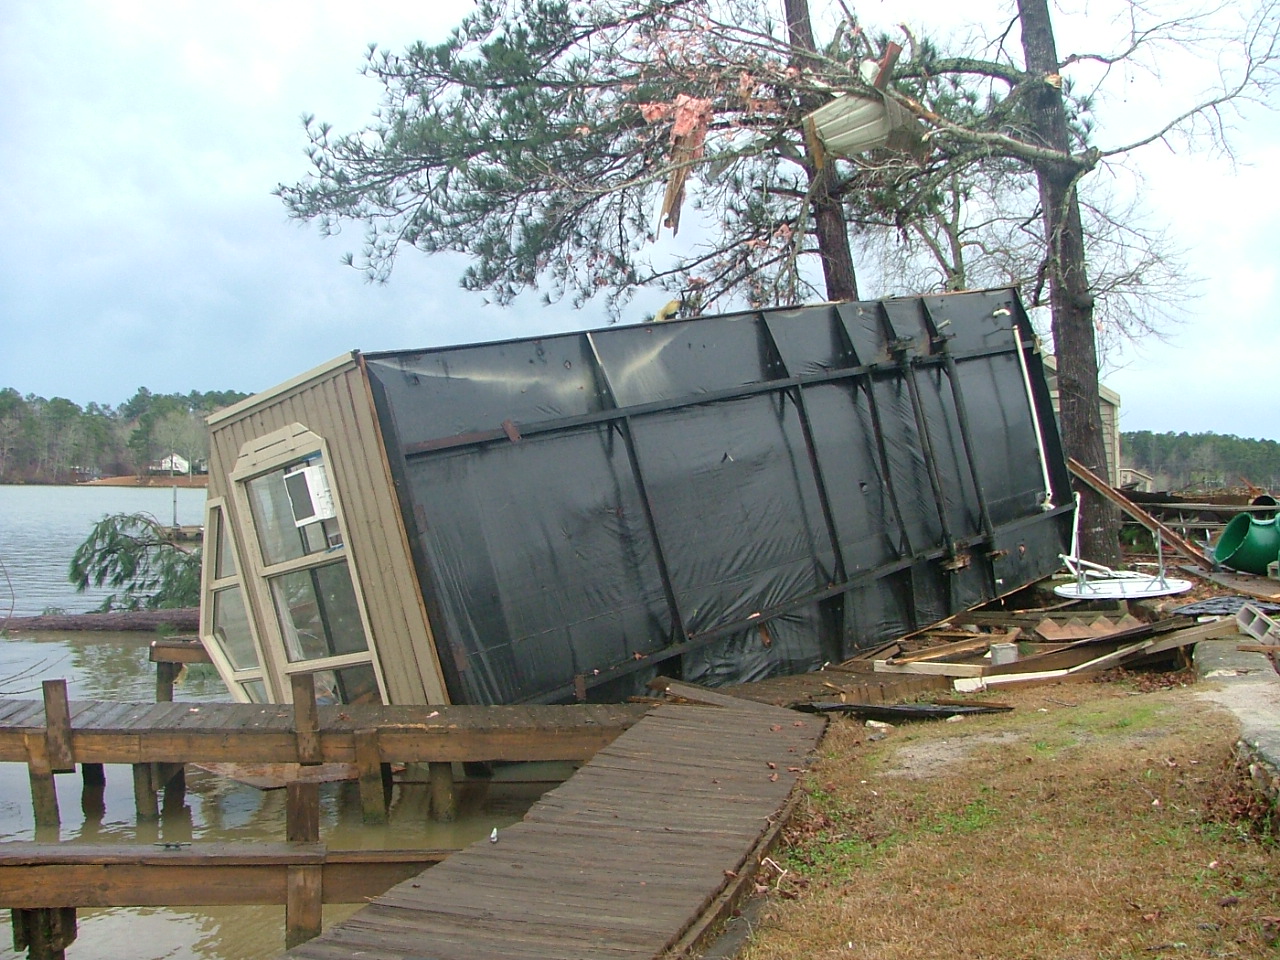 Storms kill 11, injure 23 in US